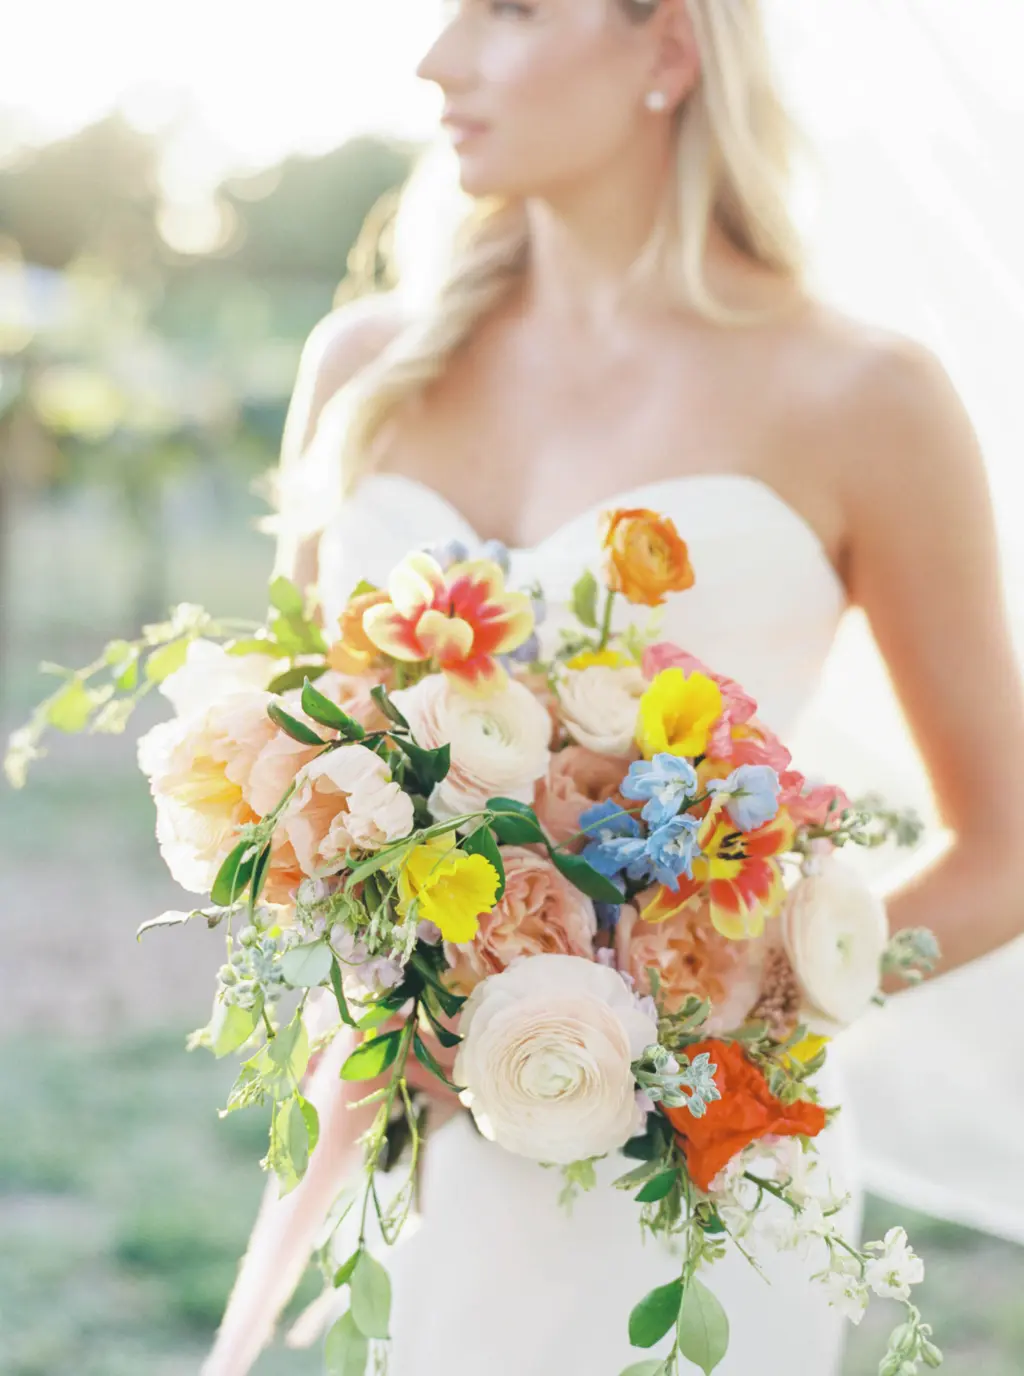 Colorful Spring Wildflower Bridal Wedding Bouquet Inspiration | Bride Bouquet with Peach Ranunculus, Blush Garden Roses, Orange Tulips and Yellow Daffodils | Sarasota Florist Save The Date Florida